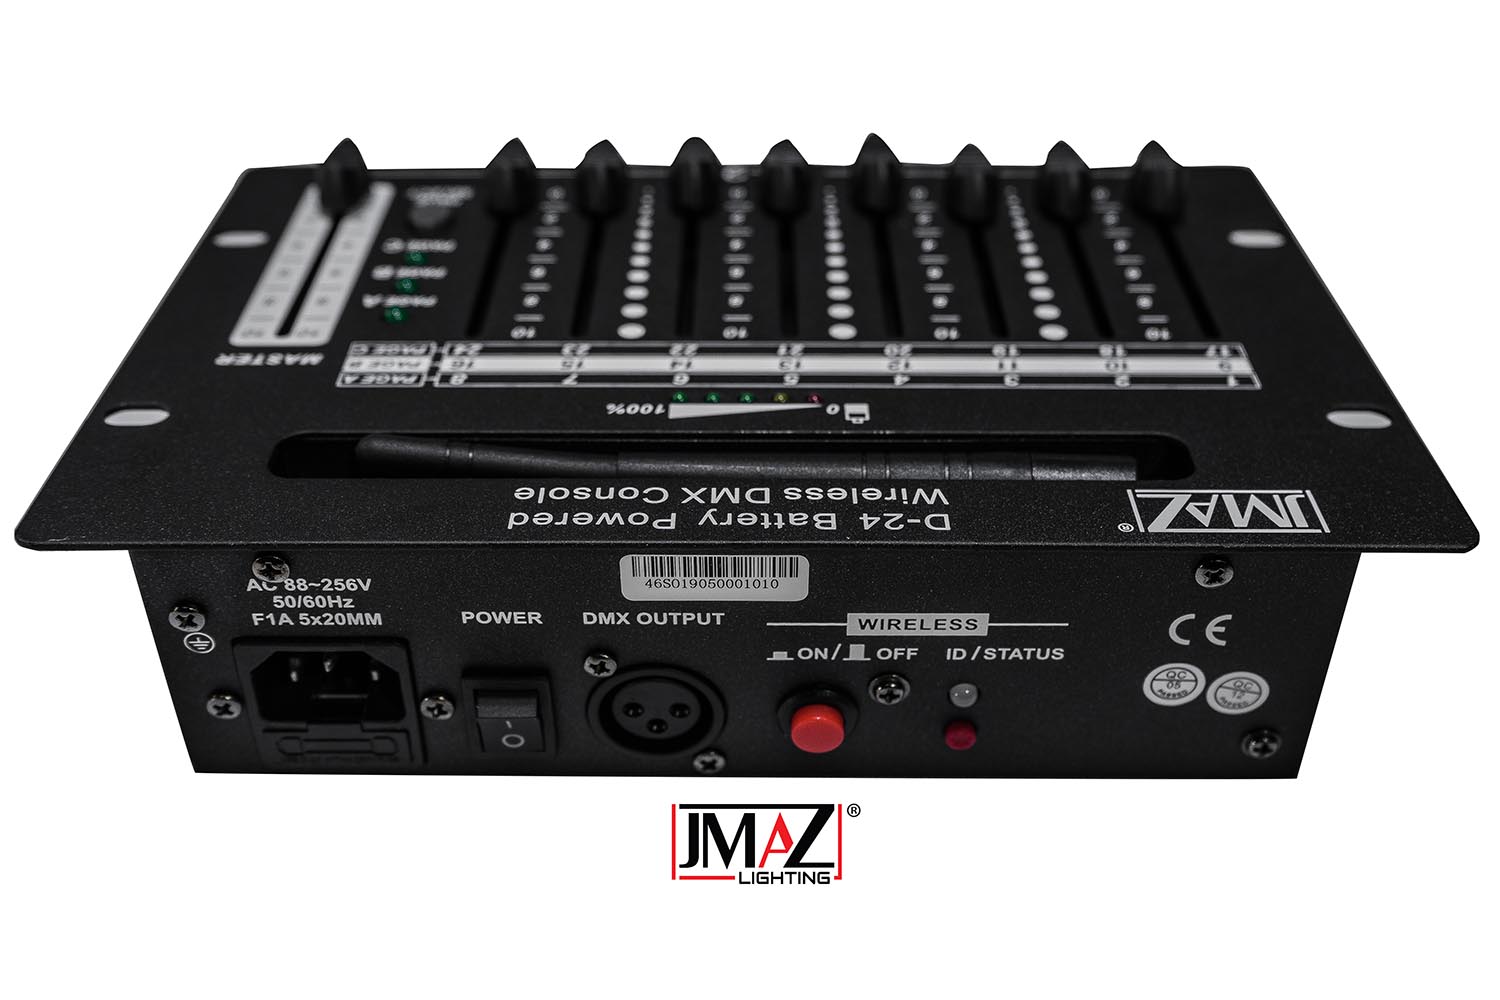 B-Stock: JMAZ JZ6001 Battery Powered D-24 Wireless DMX Controller With 24 Channel and 20 Hour Battery Life - Hollywood DJ